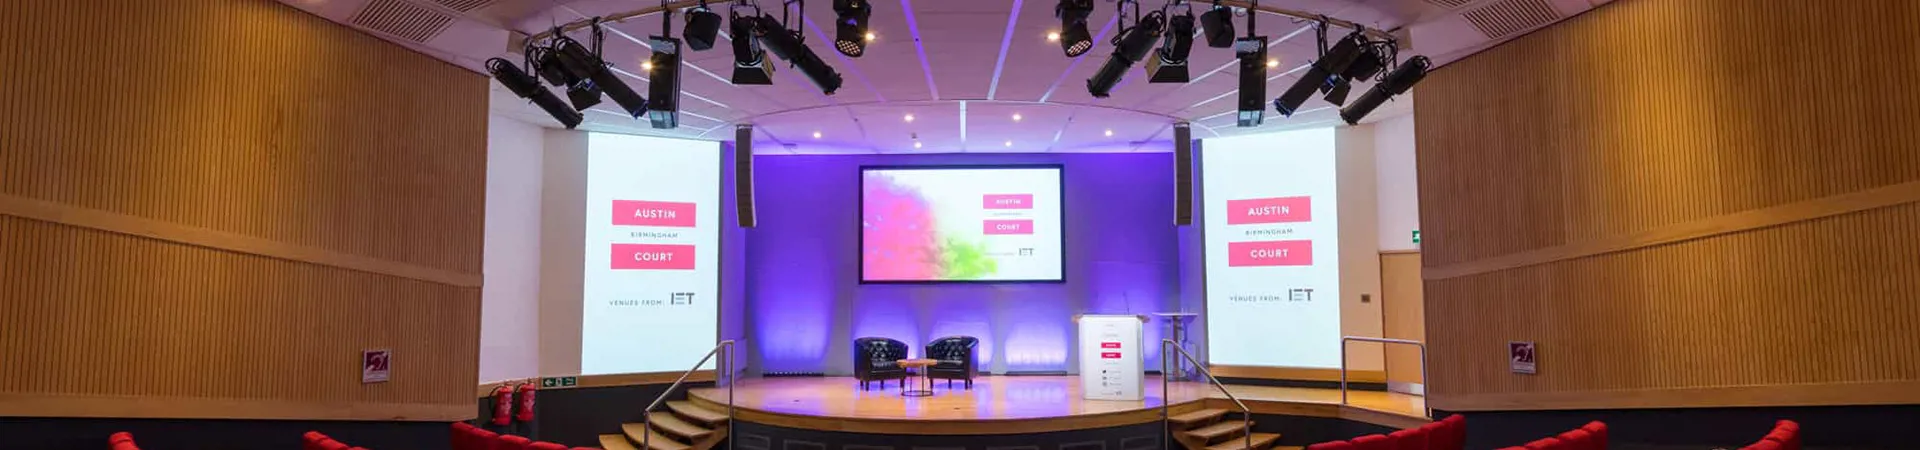 Image Of The Kingston Lecture Theatre Header Image